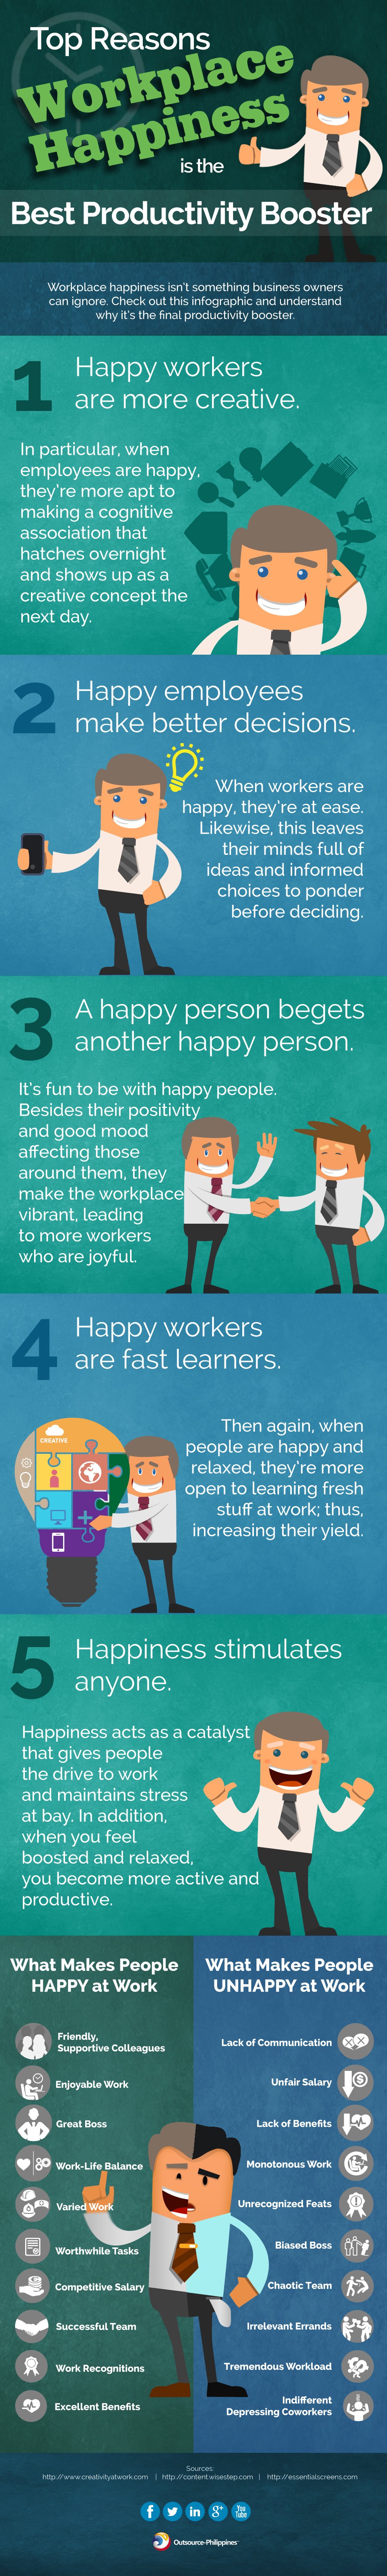 workplace happiness: infographic